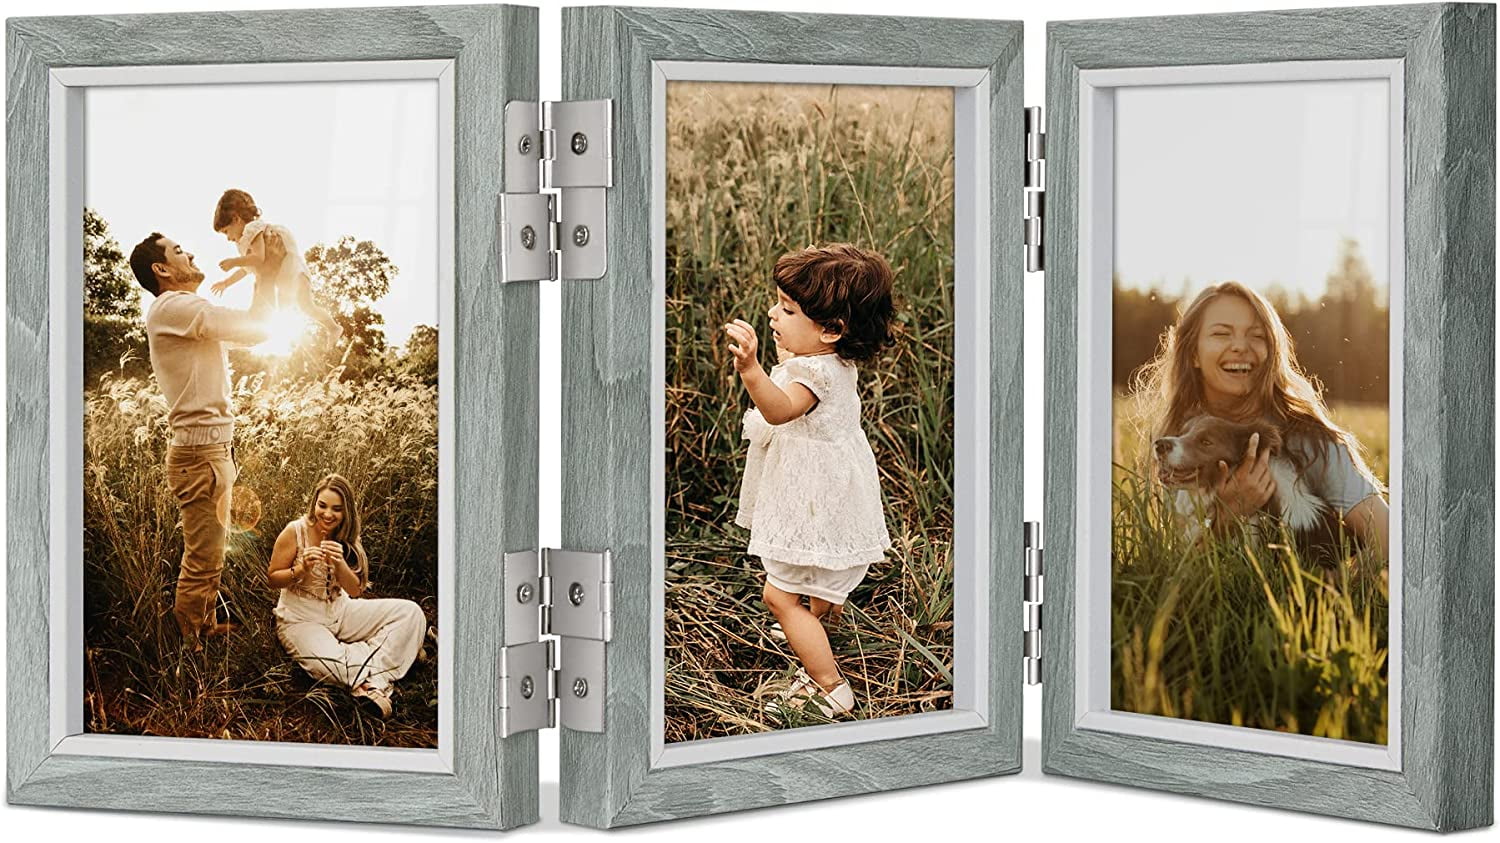 Hand Crafted Natural Fiber Photo Frames (4x6 and 3x5) - Autumn